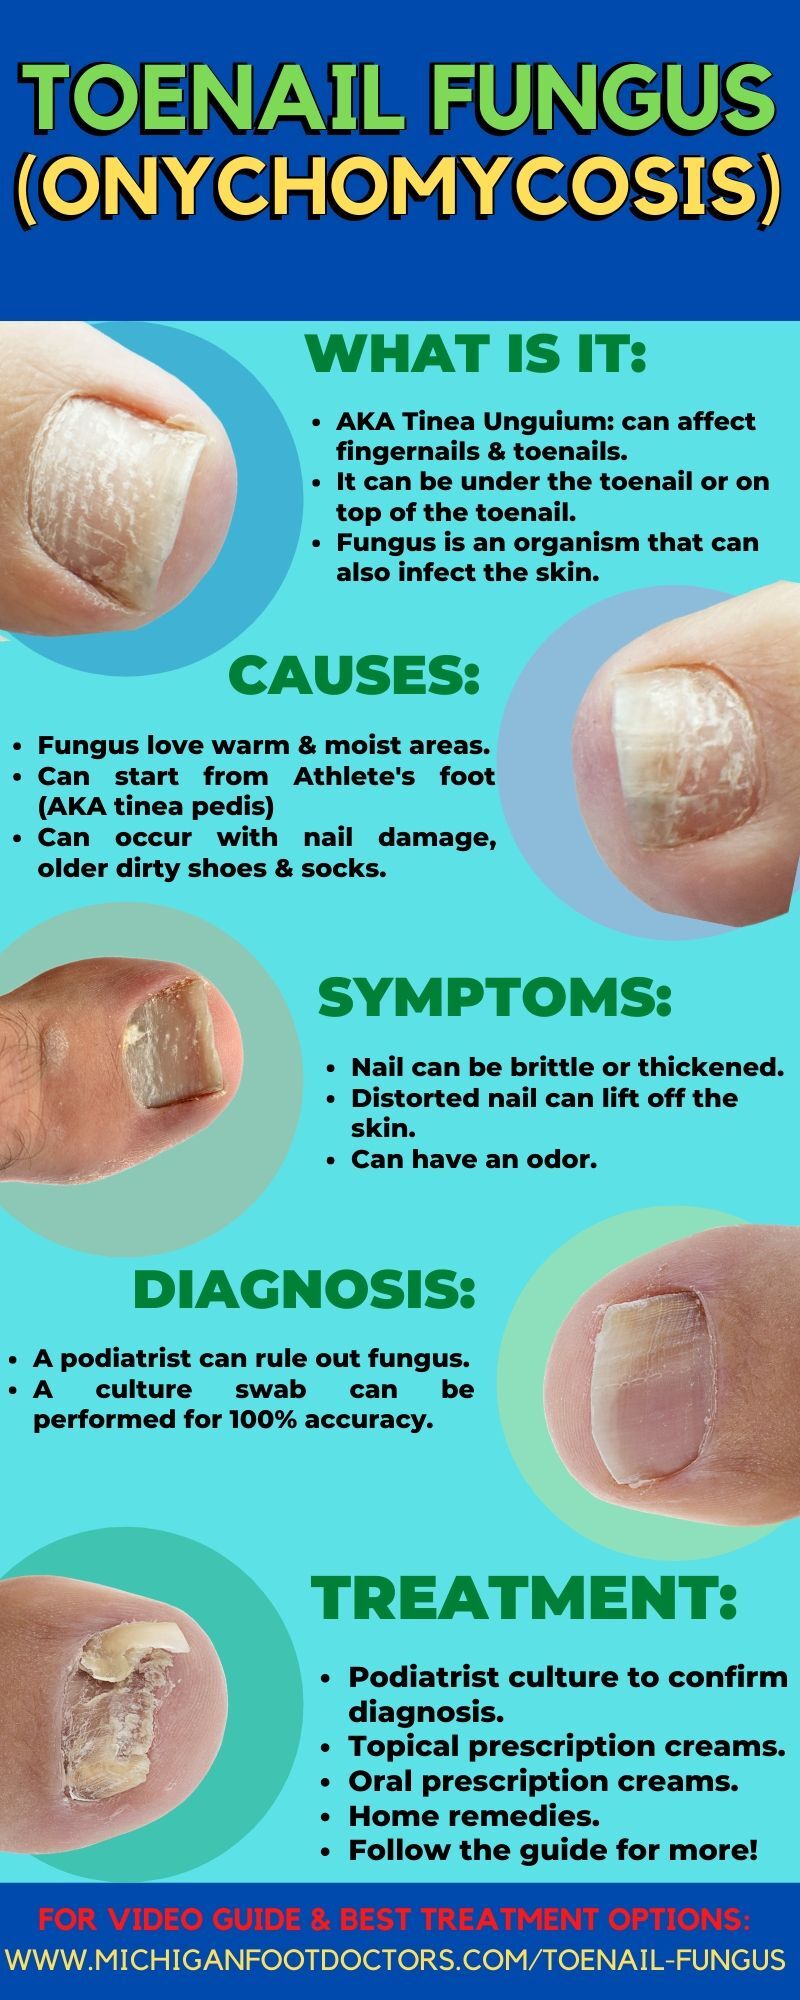 18 Simple Home Remedies For Fungal Infections! - PharmEasy Blog